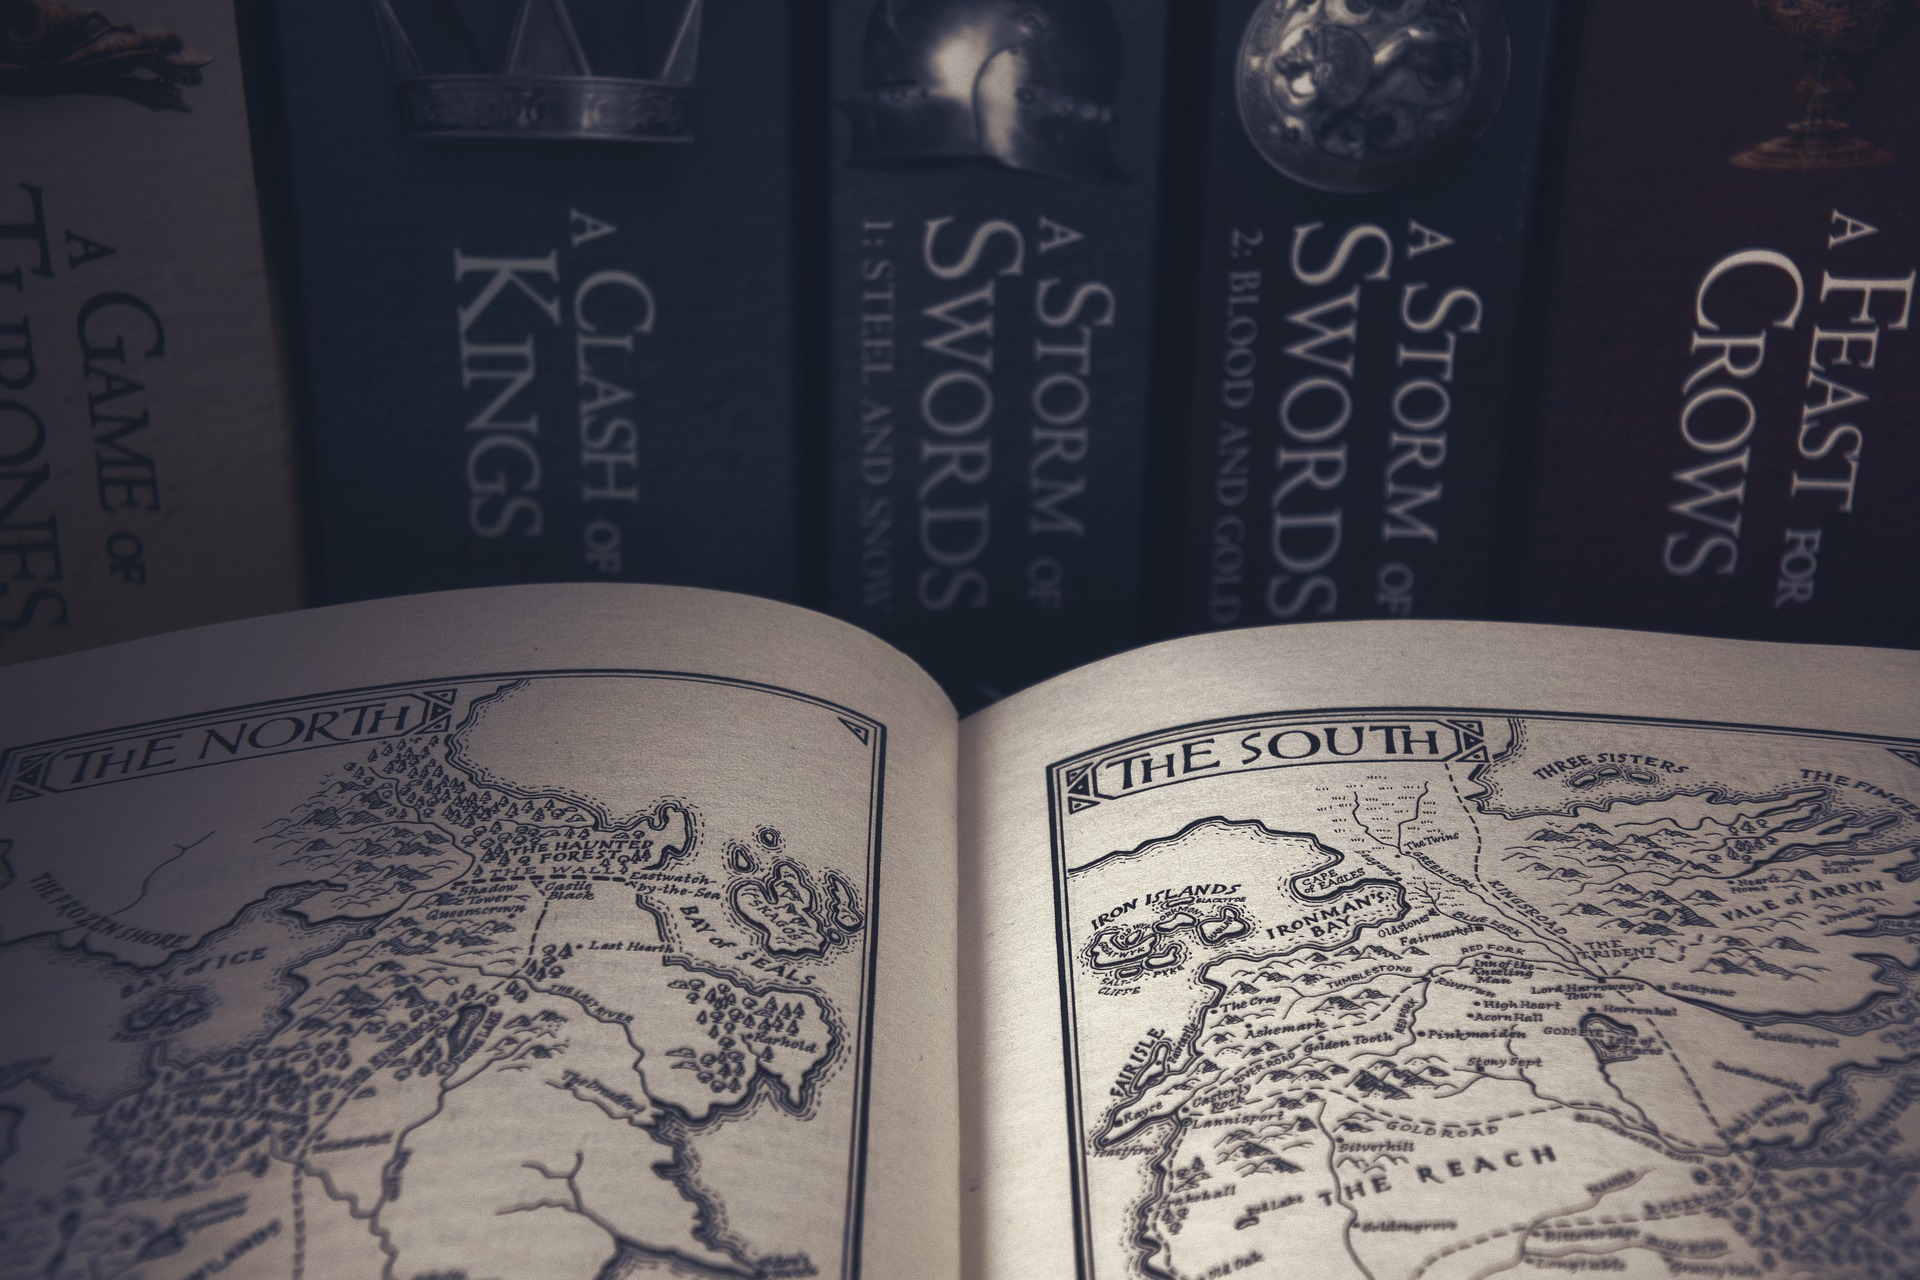 Game of Thrones books and map